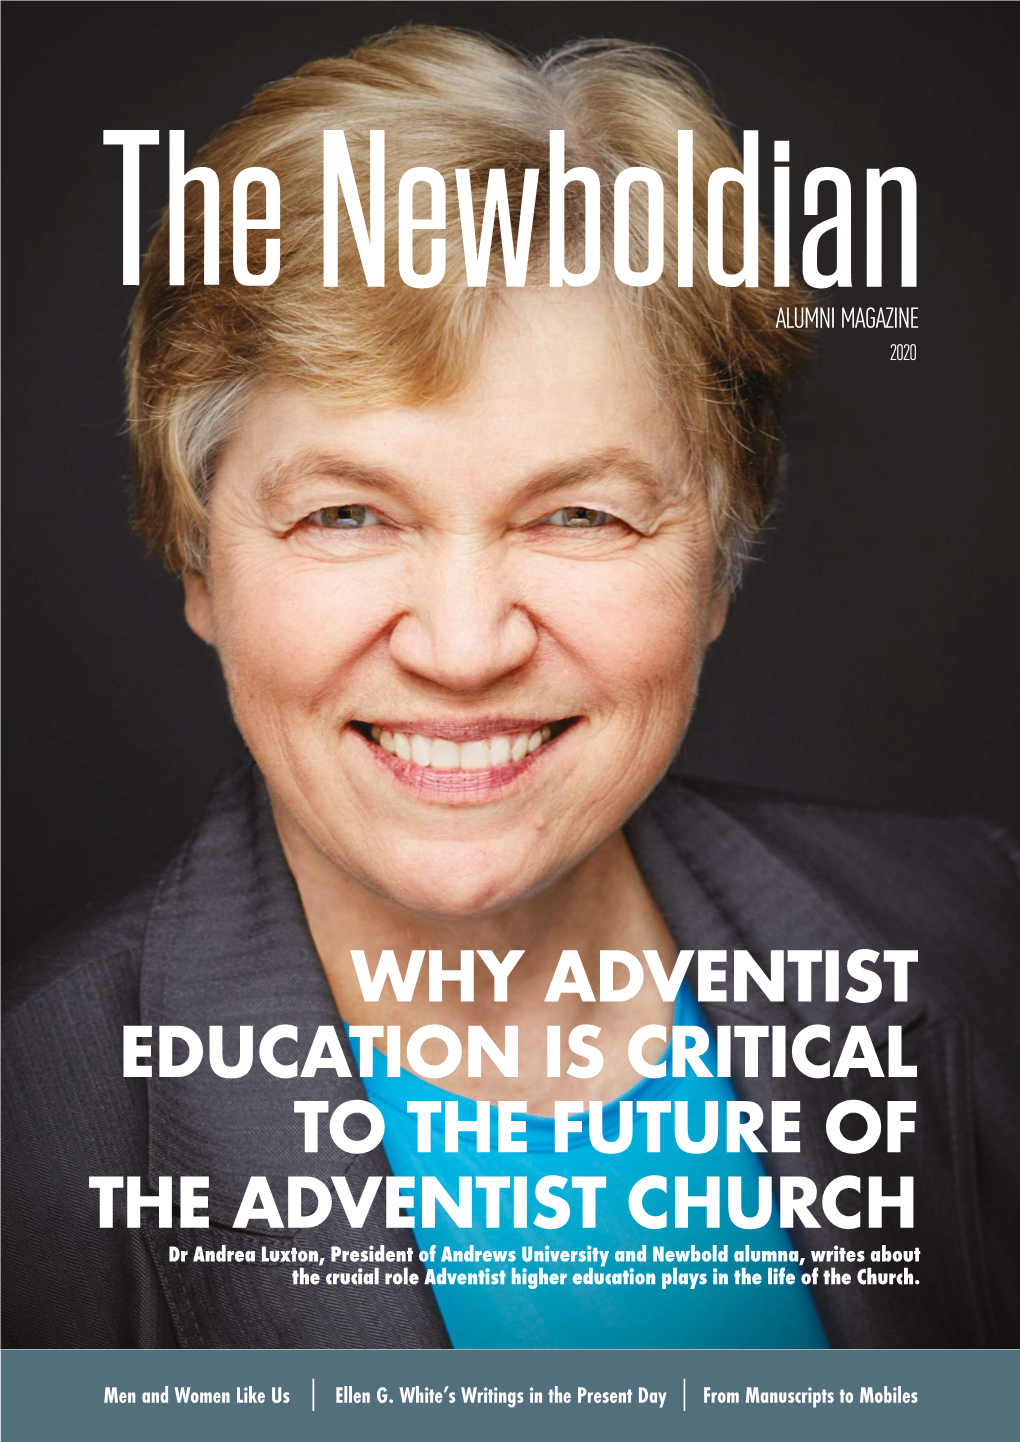 Why Adventist Education Is Critical to the Future of the Adventist Church